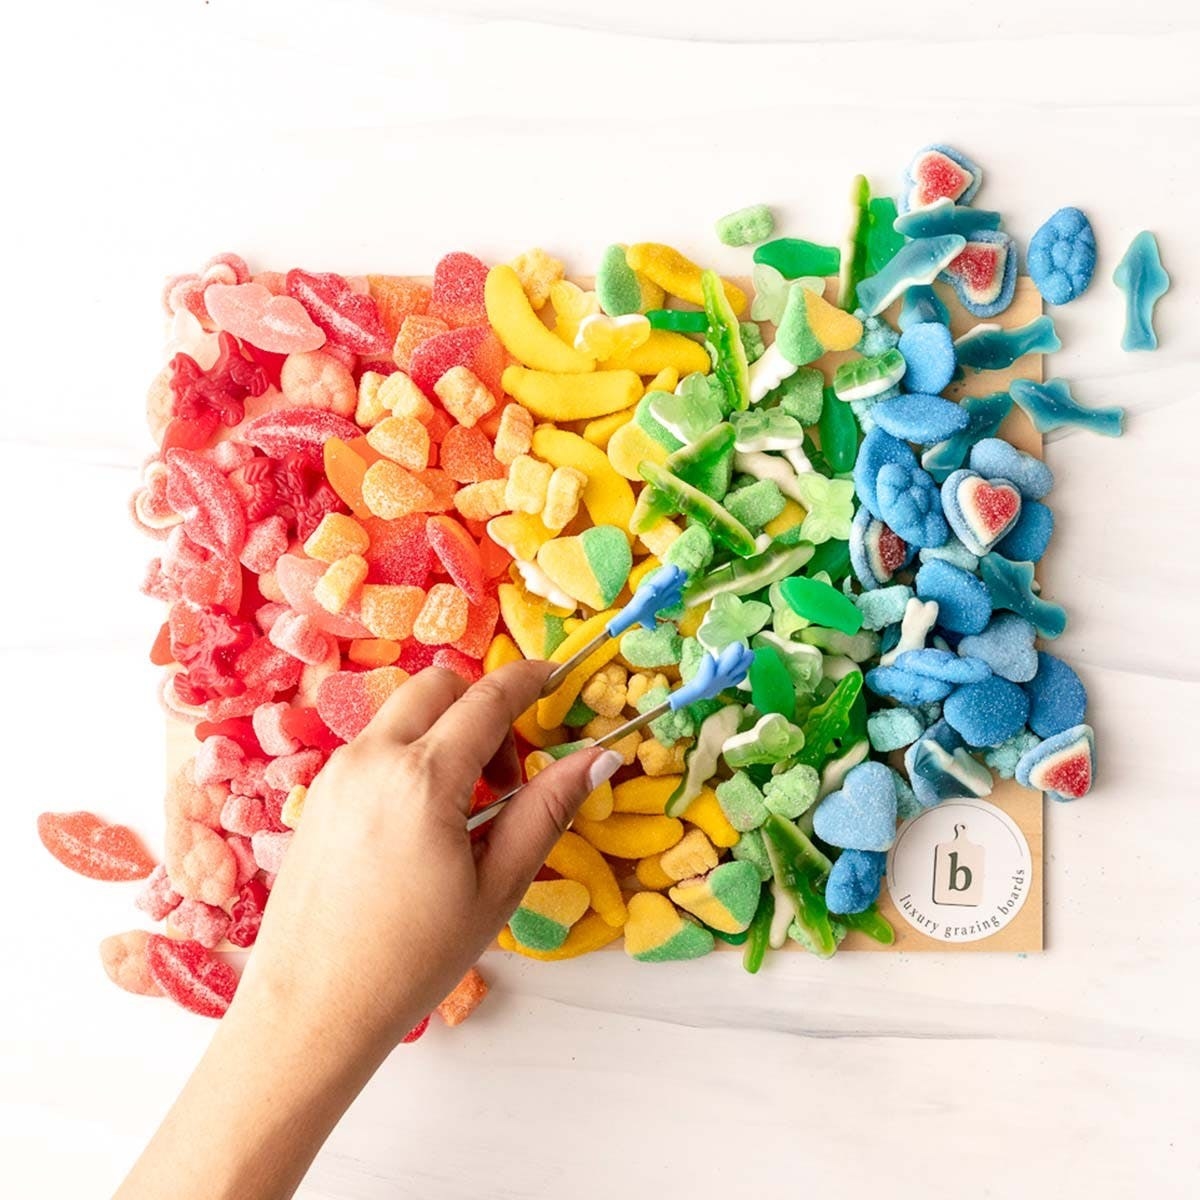 Hand reaching for rainbow candy from assortment on a baord